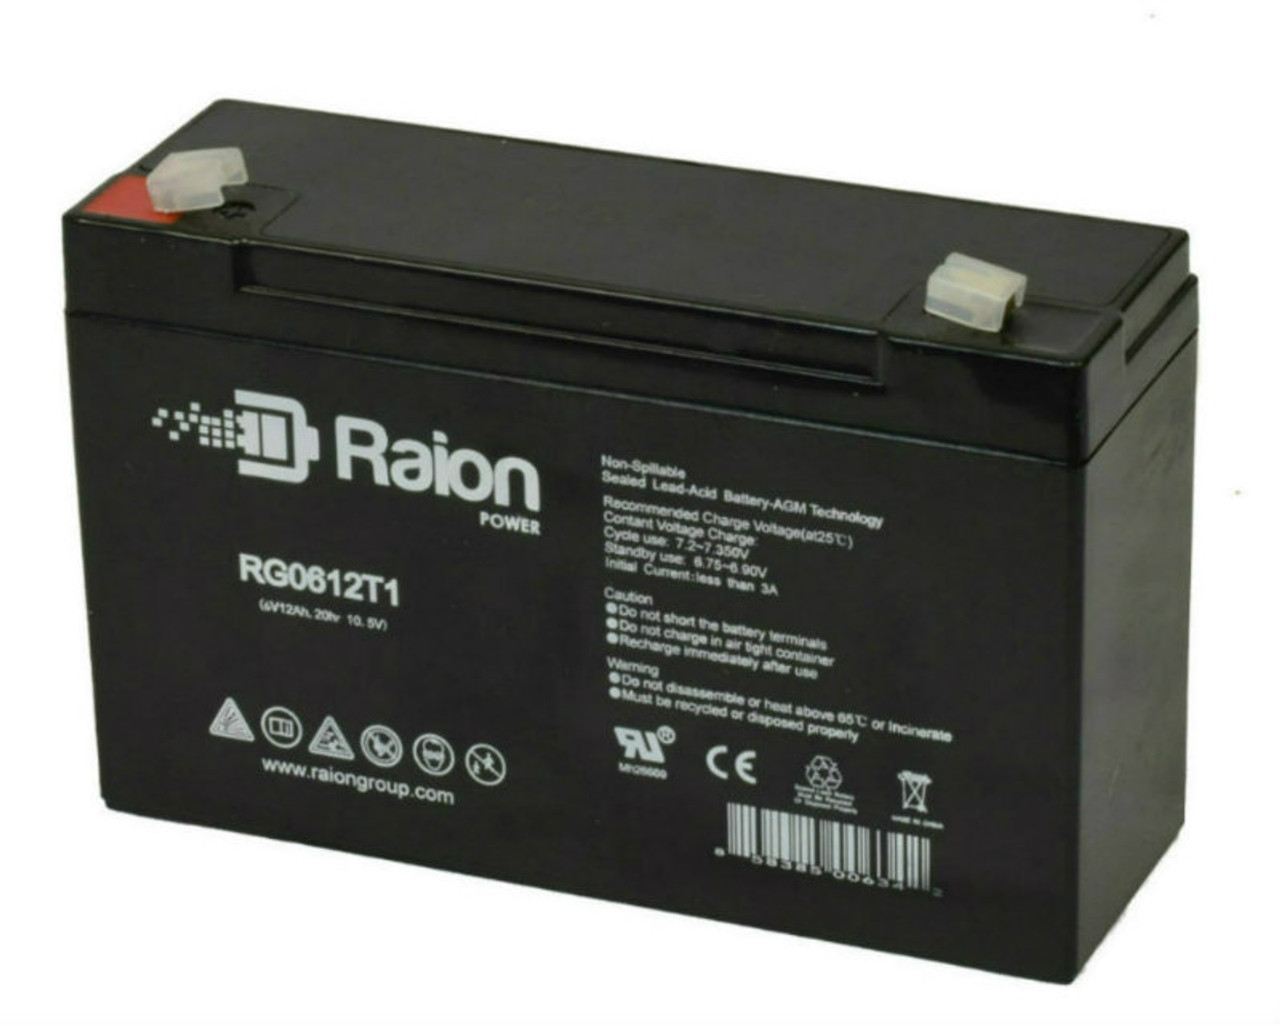 Raion Power RG06120T1 Replacement 6V 12Ah Emergency Light Battery for Holophane M8